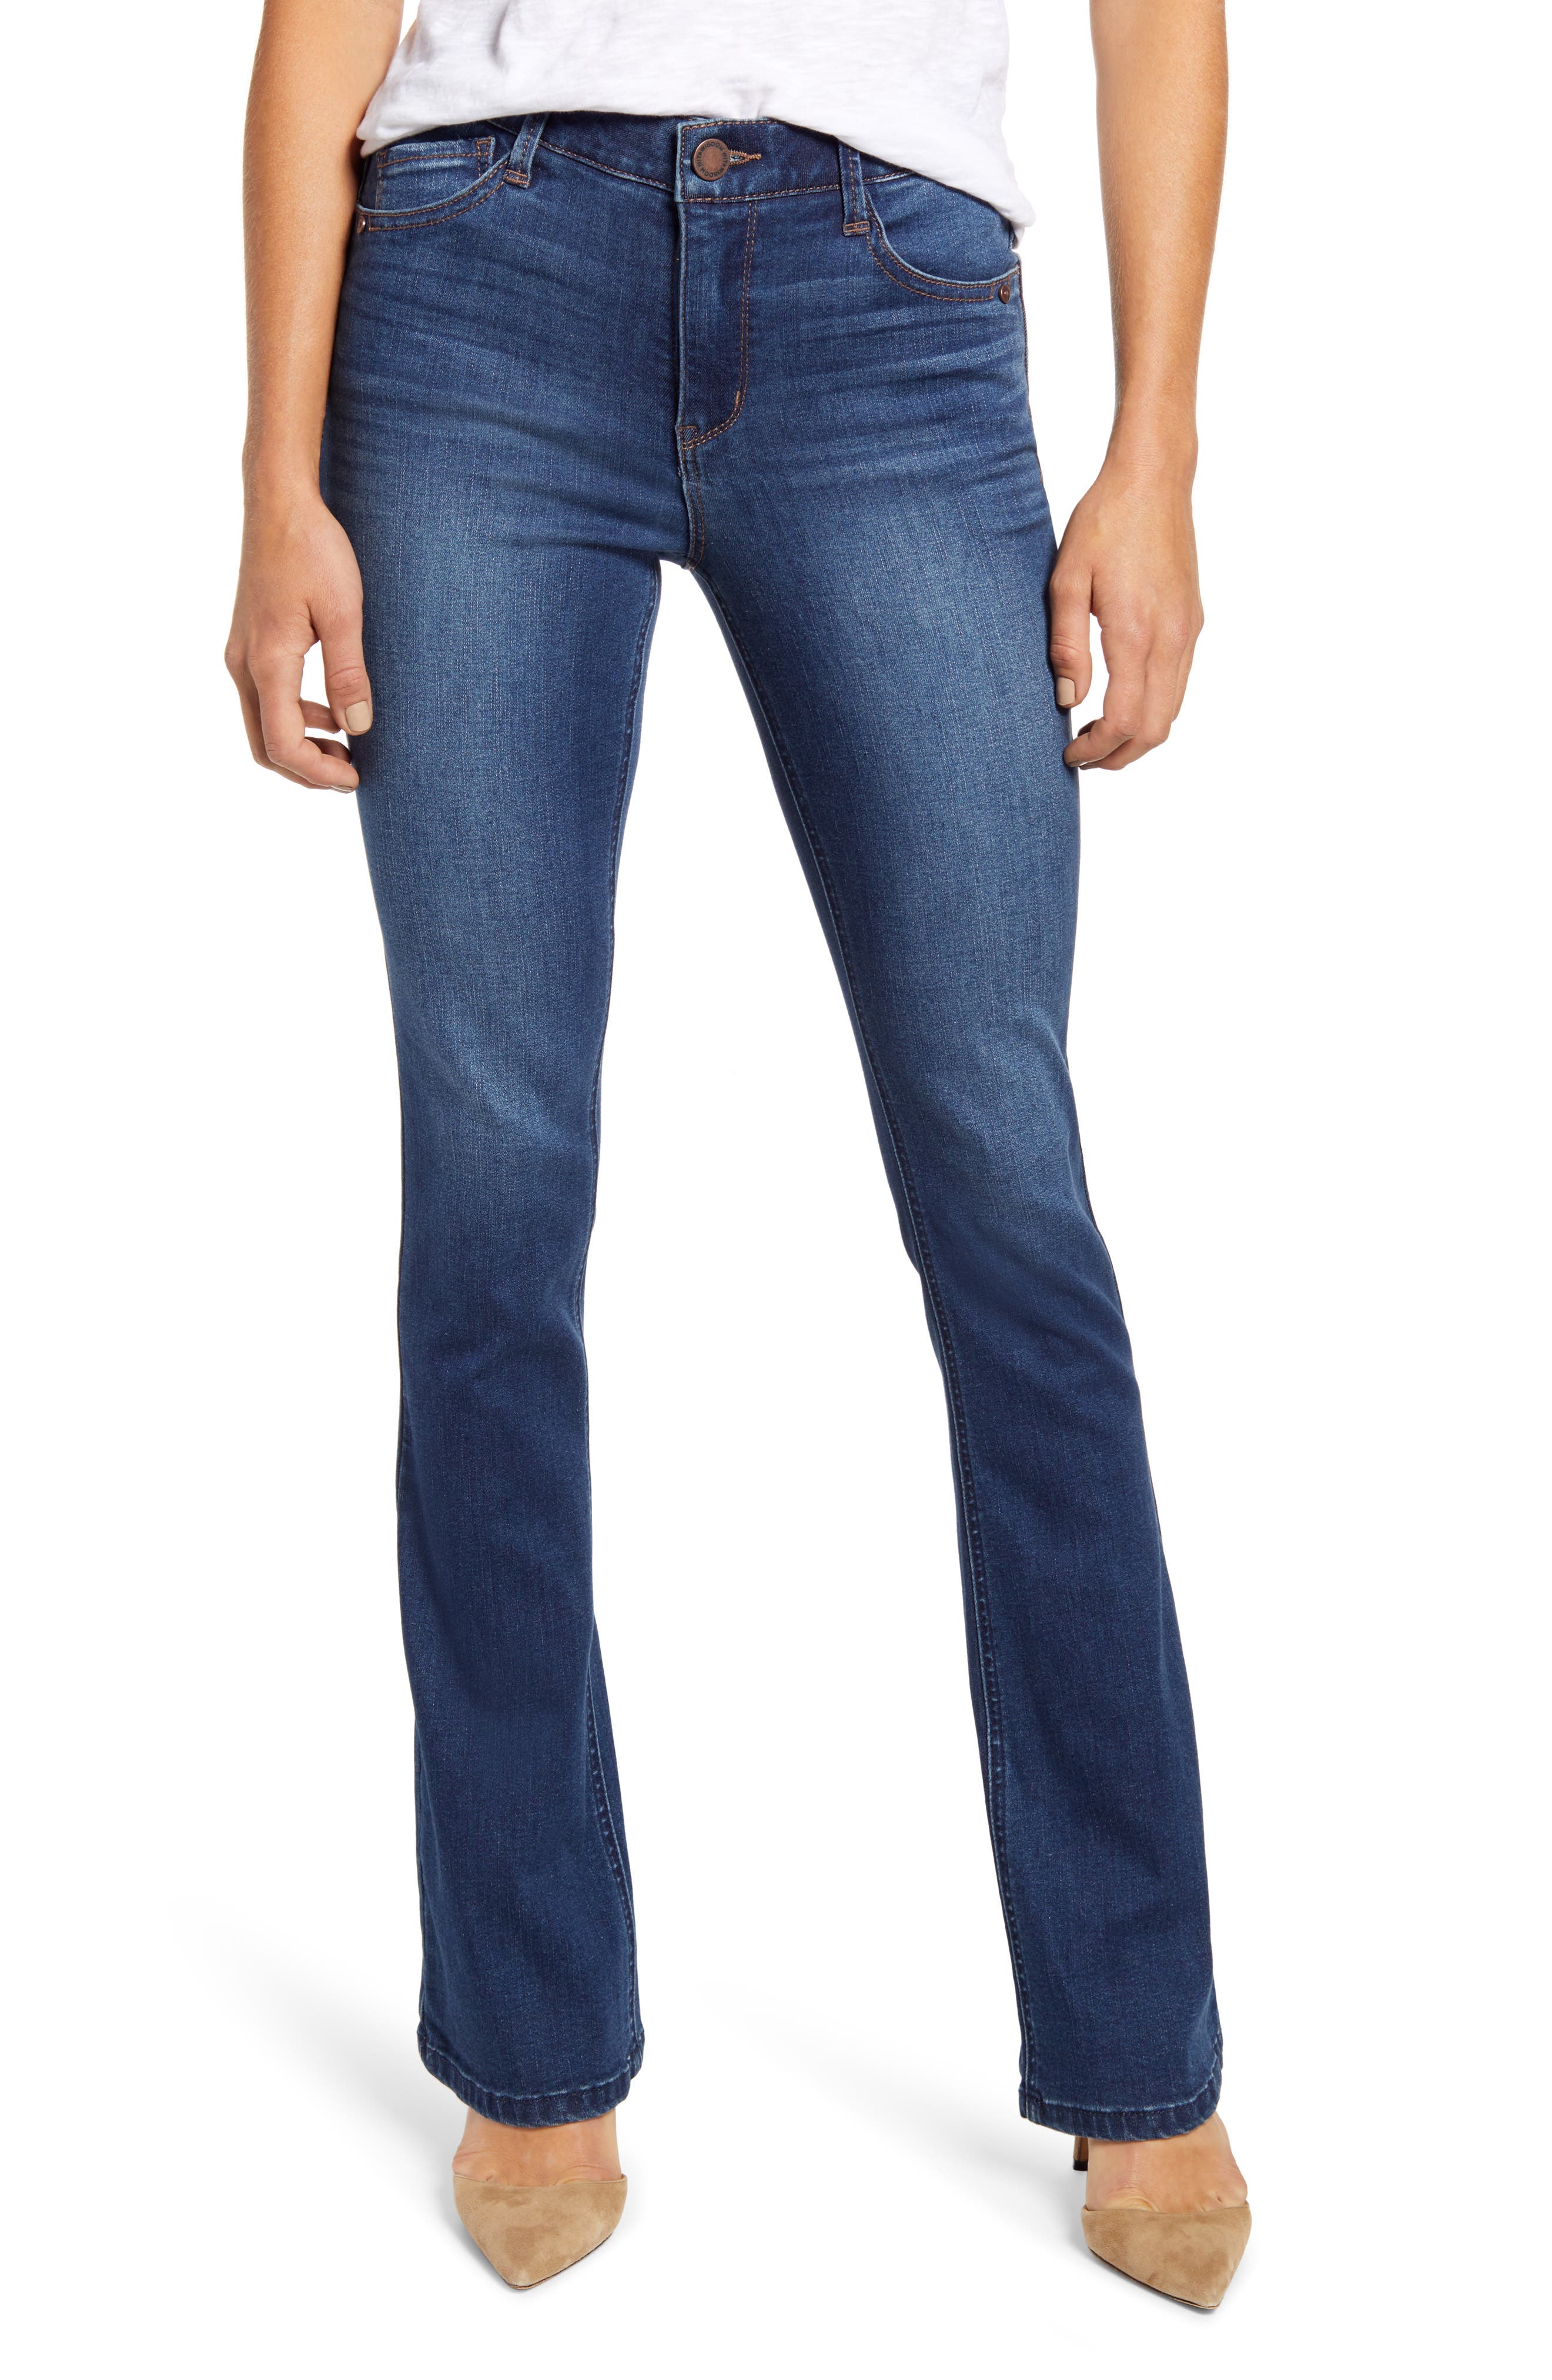 best jeans for muscular thighs